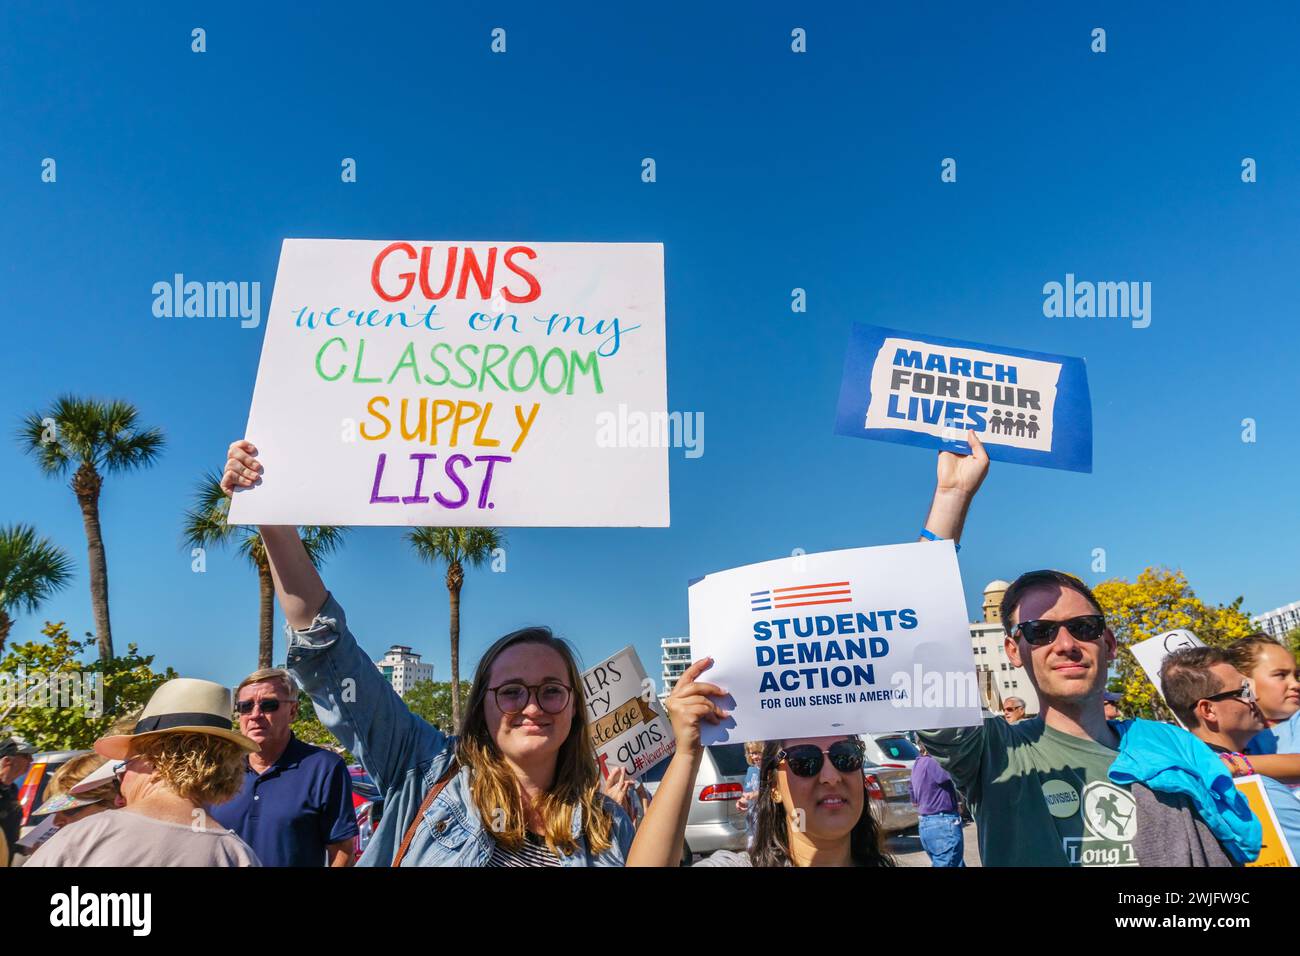 Sarasota, FL, US -March 24, 2018 - Protesters gather at the student-led protest March For Our Lives holding sign about guns in the classroom. Stock Photo